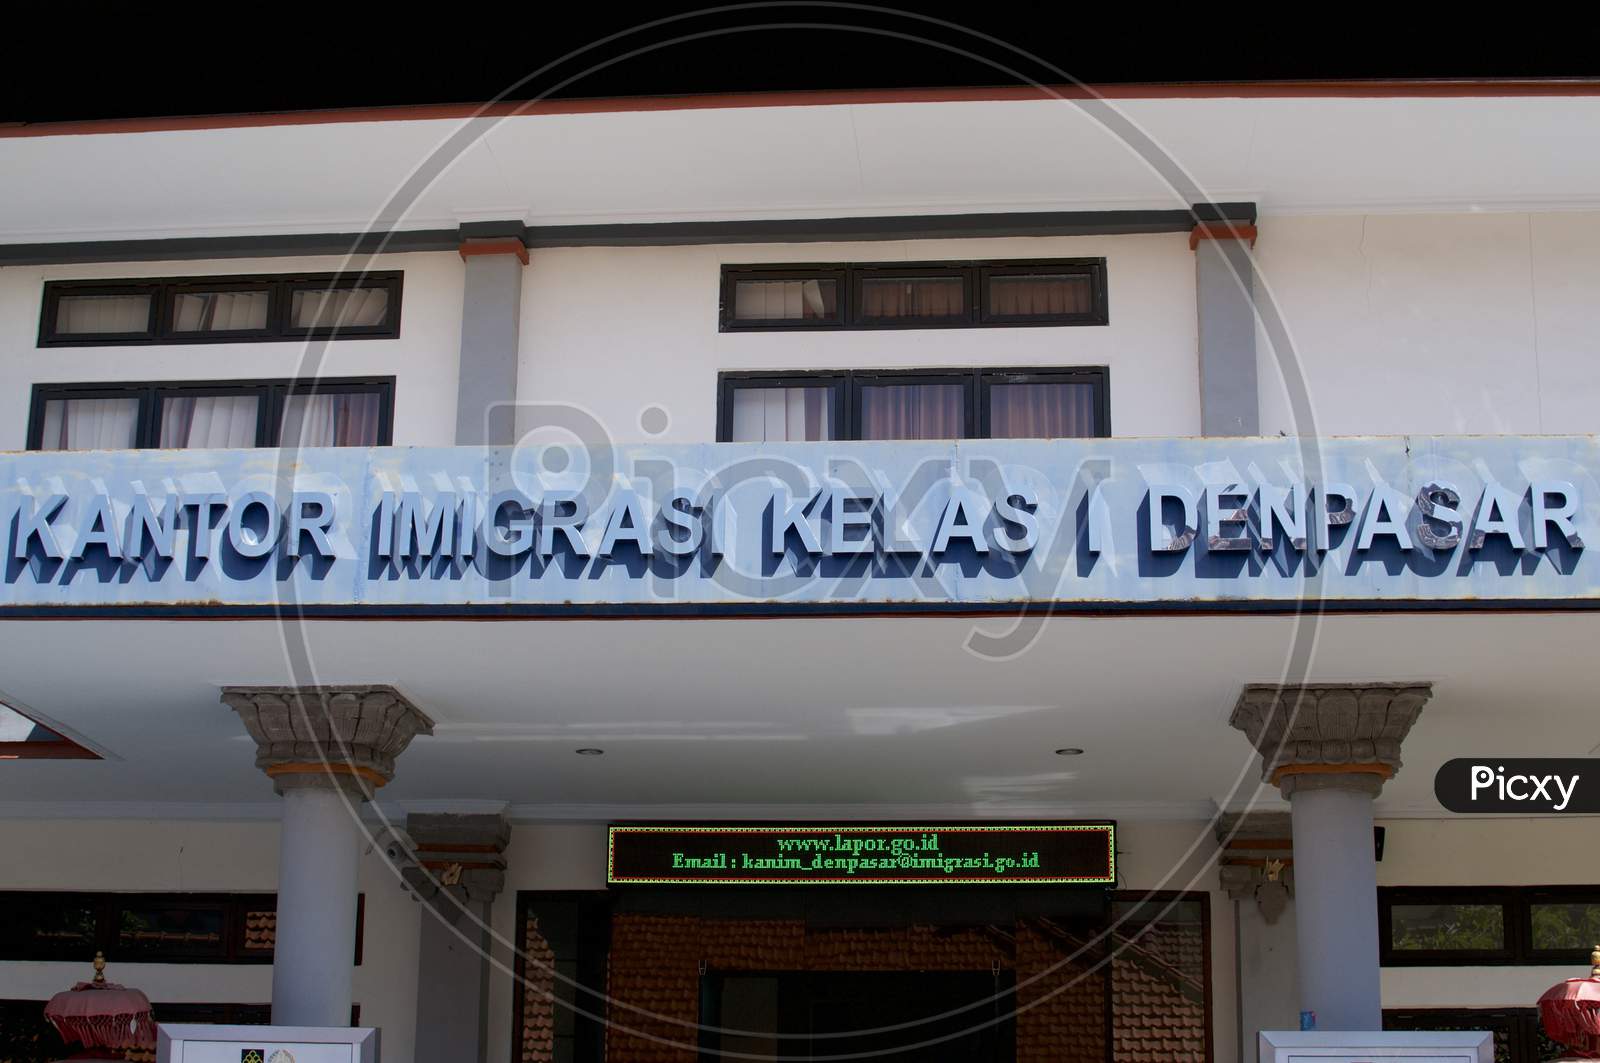 Immigartion Office Sign Of Denpasar In Bali